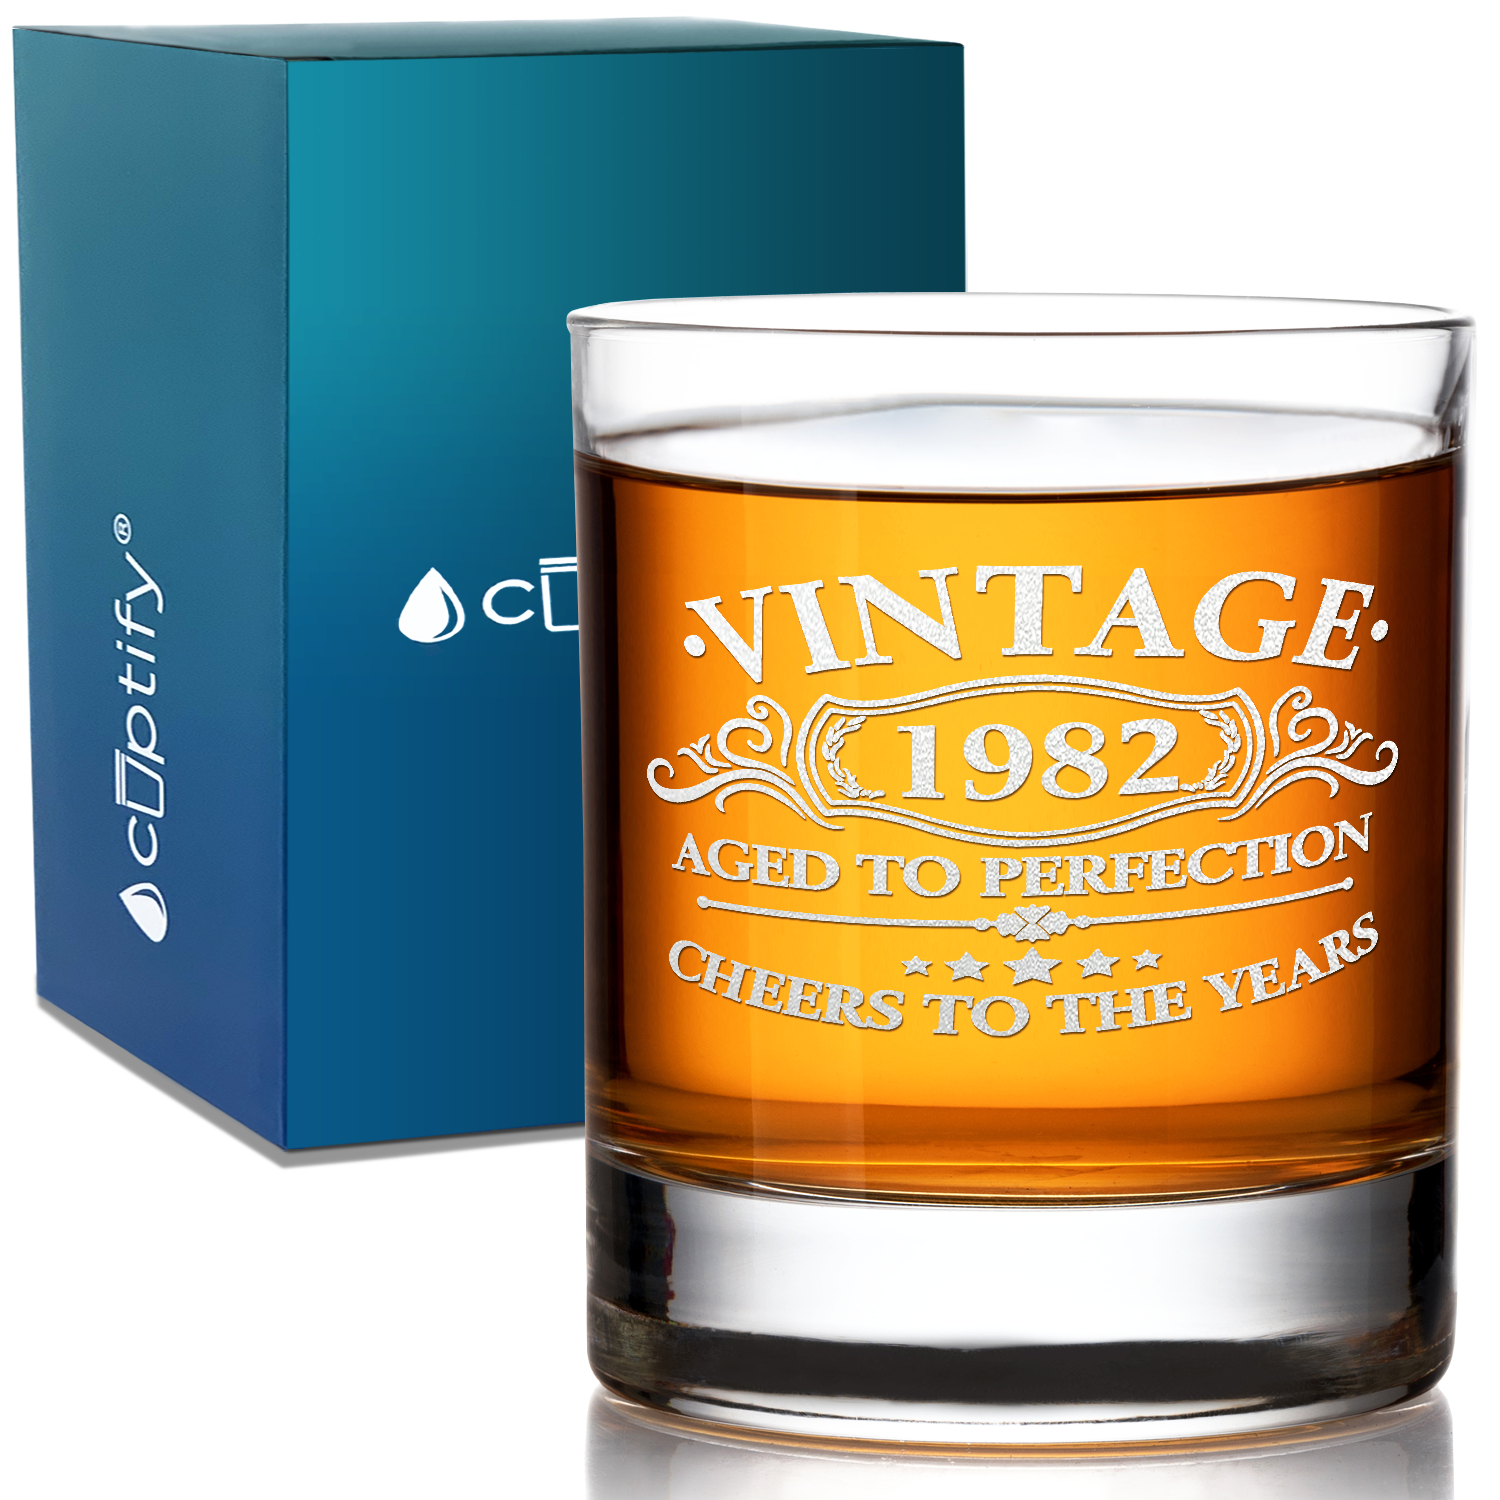 Vintage Aged To Perfection Cheers To 39 Years 1982 Laser Engraved on 10.25oz Old Fashion Glass